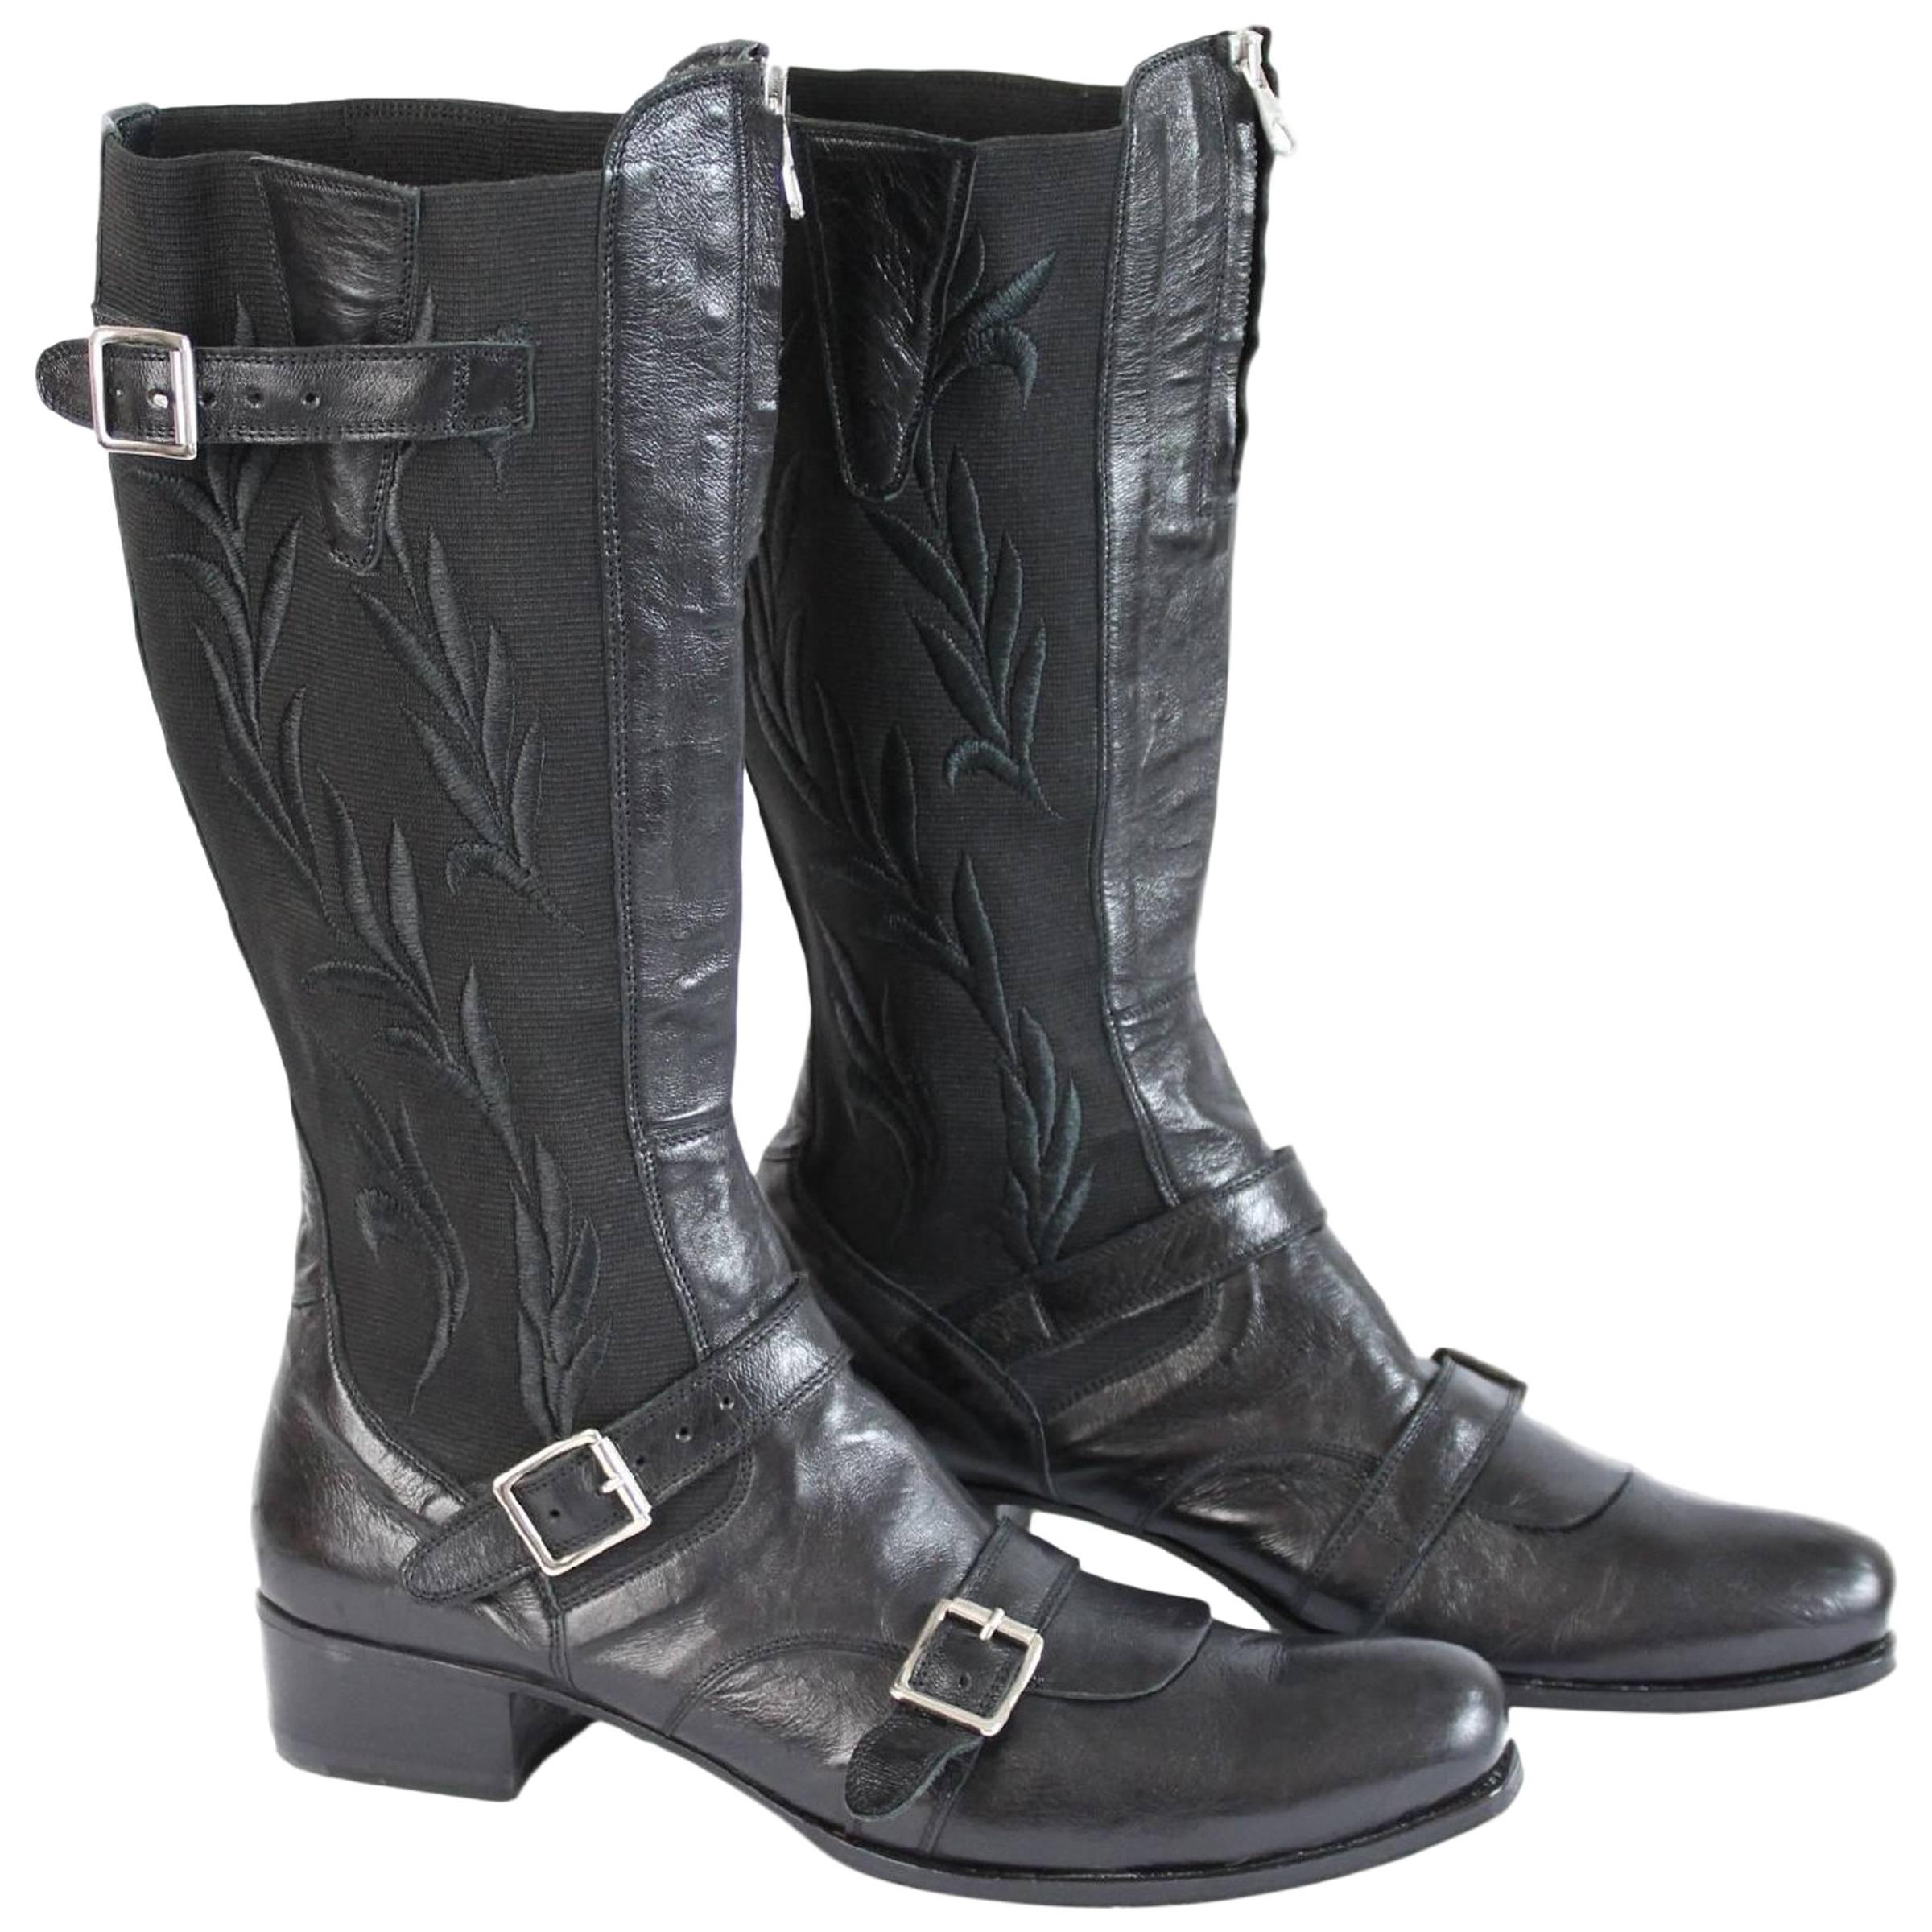 Gianni Barbato Boots Leather Black Italian Shoes, 1990s For Sale